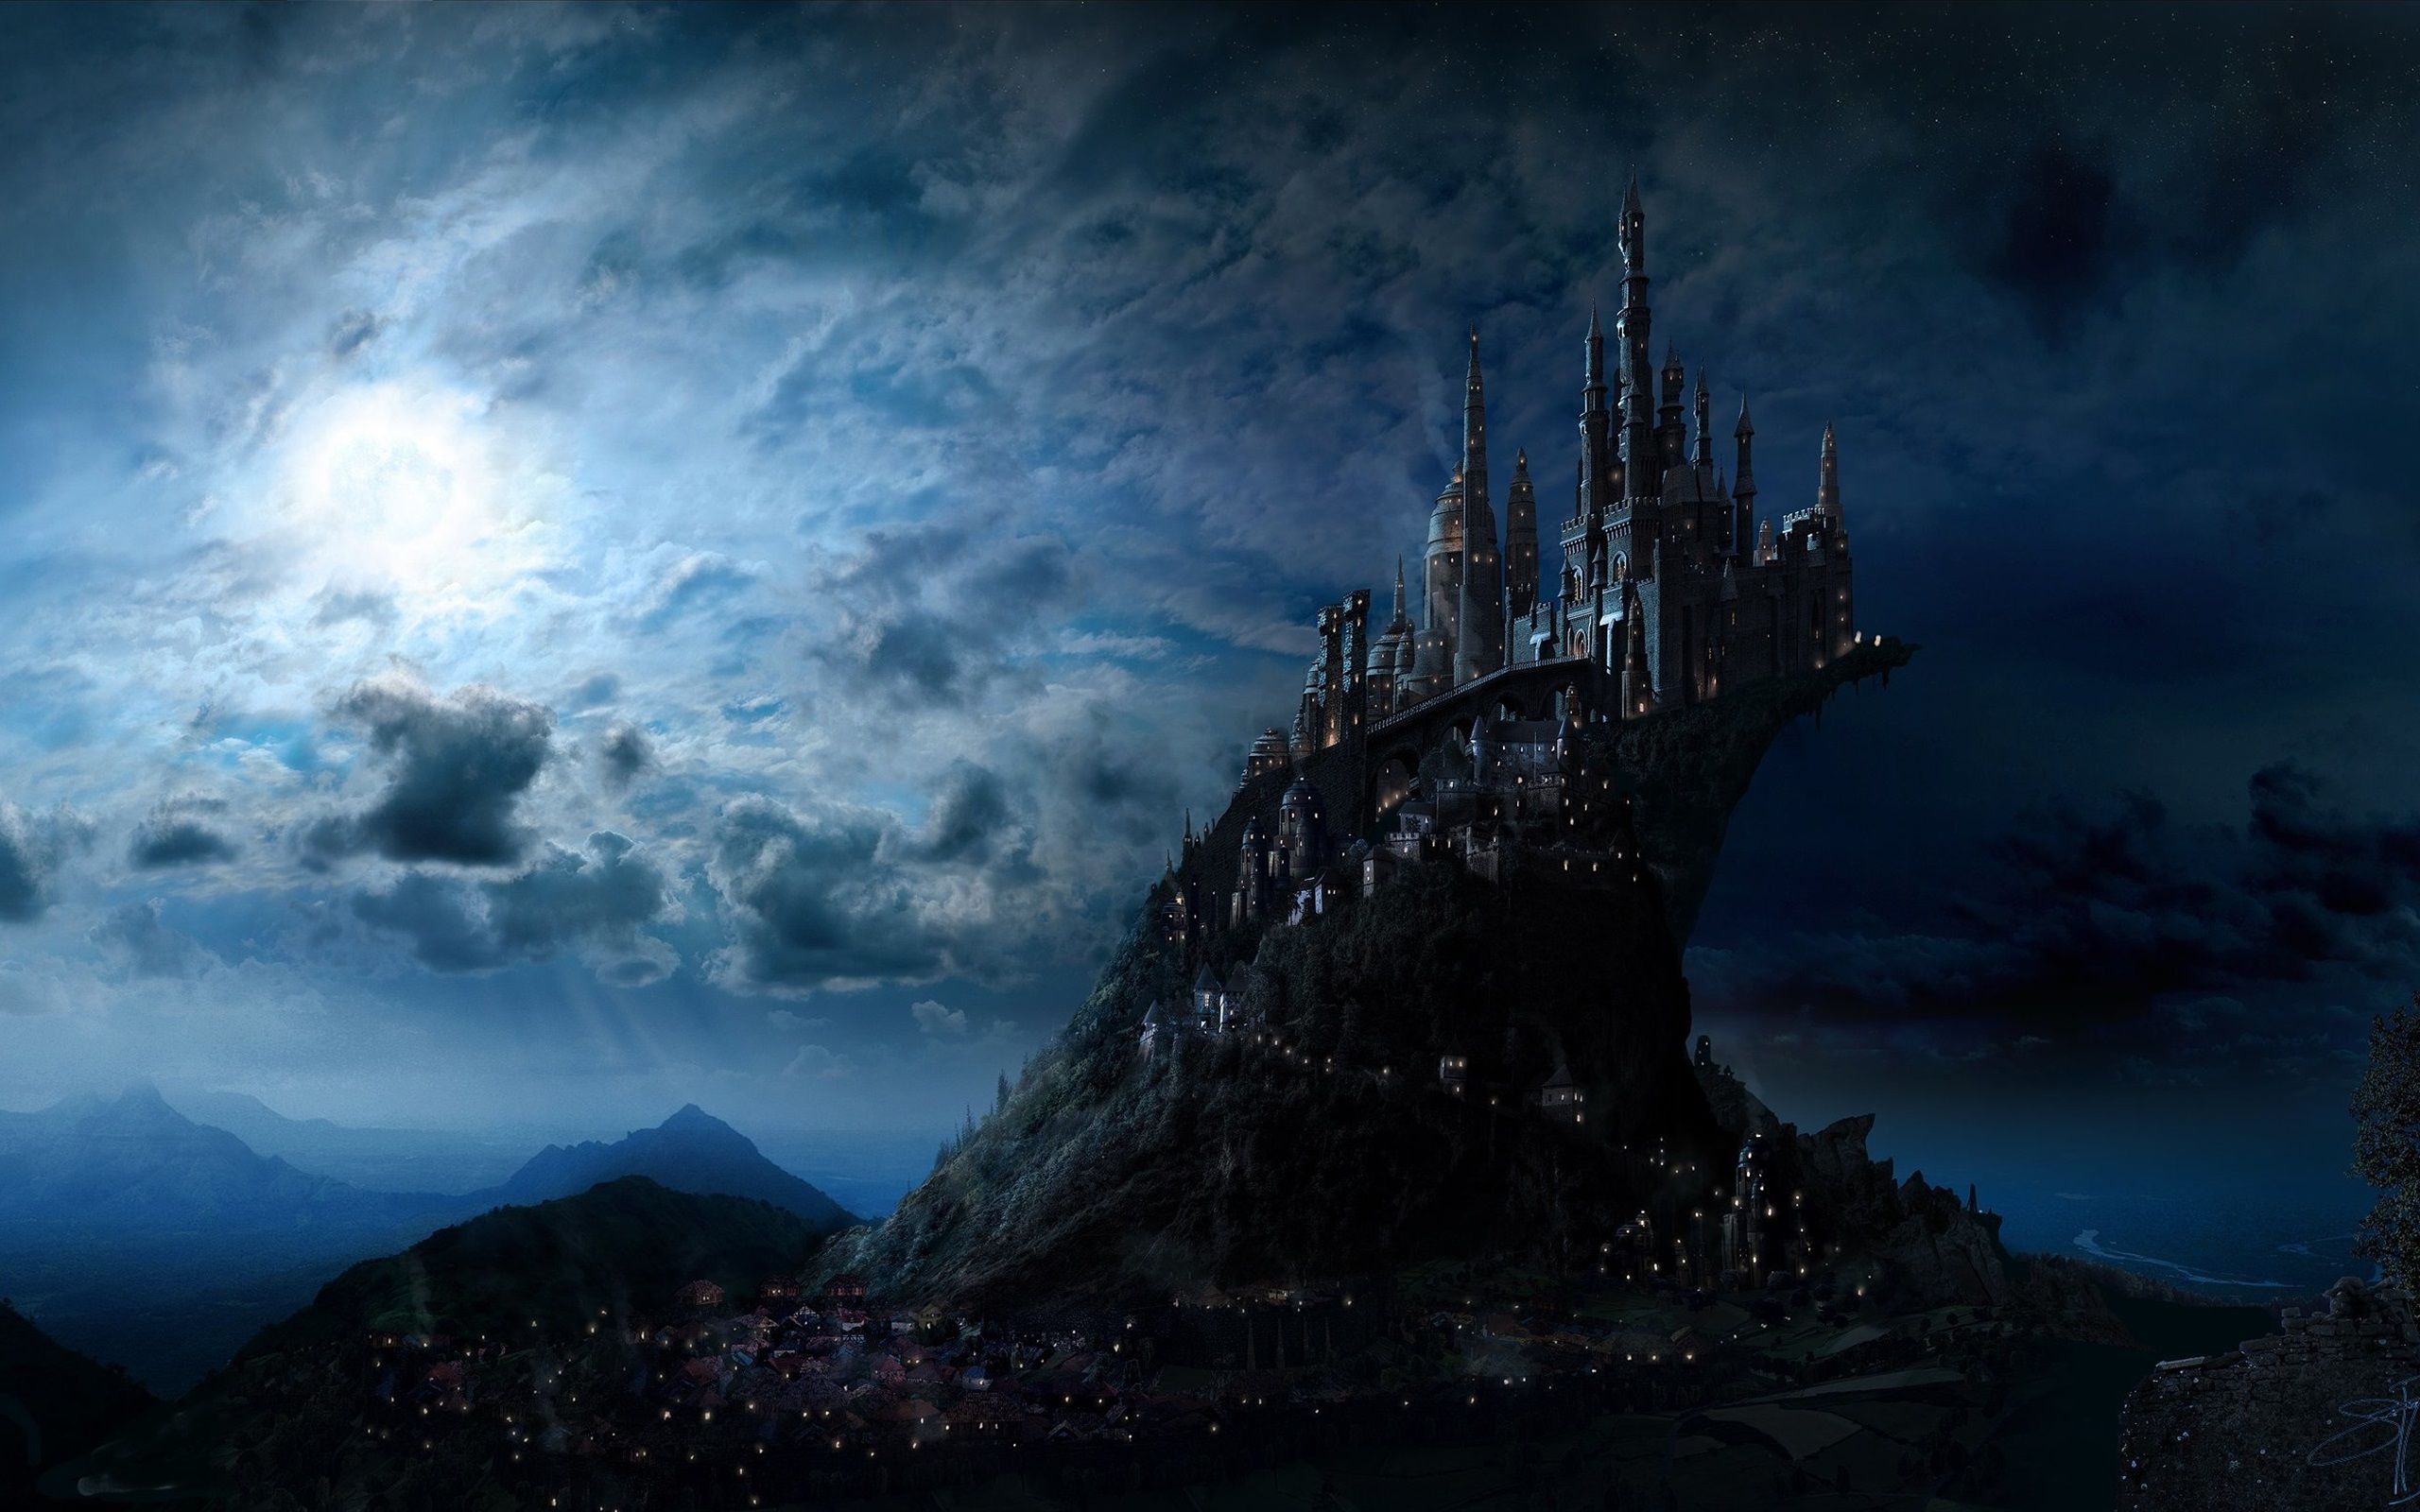 2560x1600 Wallpaper Castle Night Moon Clouds Art Picture 2560x1600 Hd Picture Image